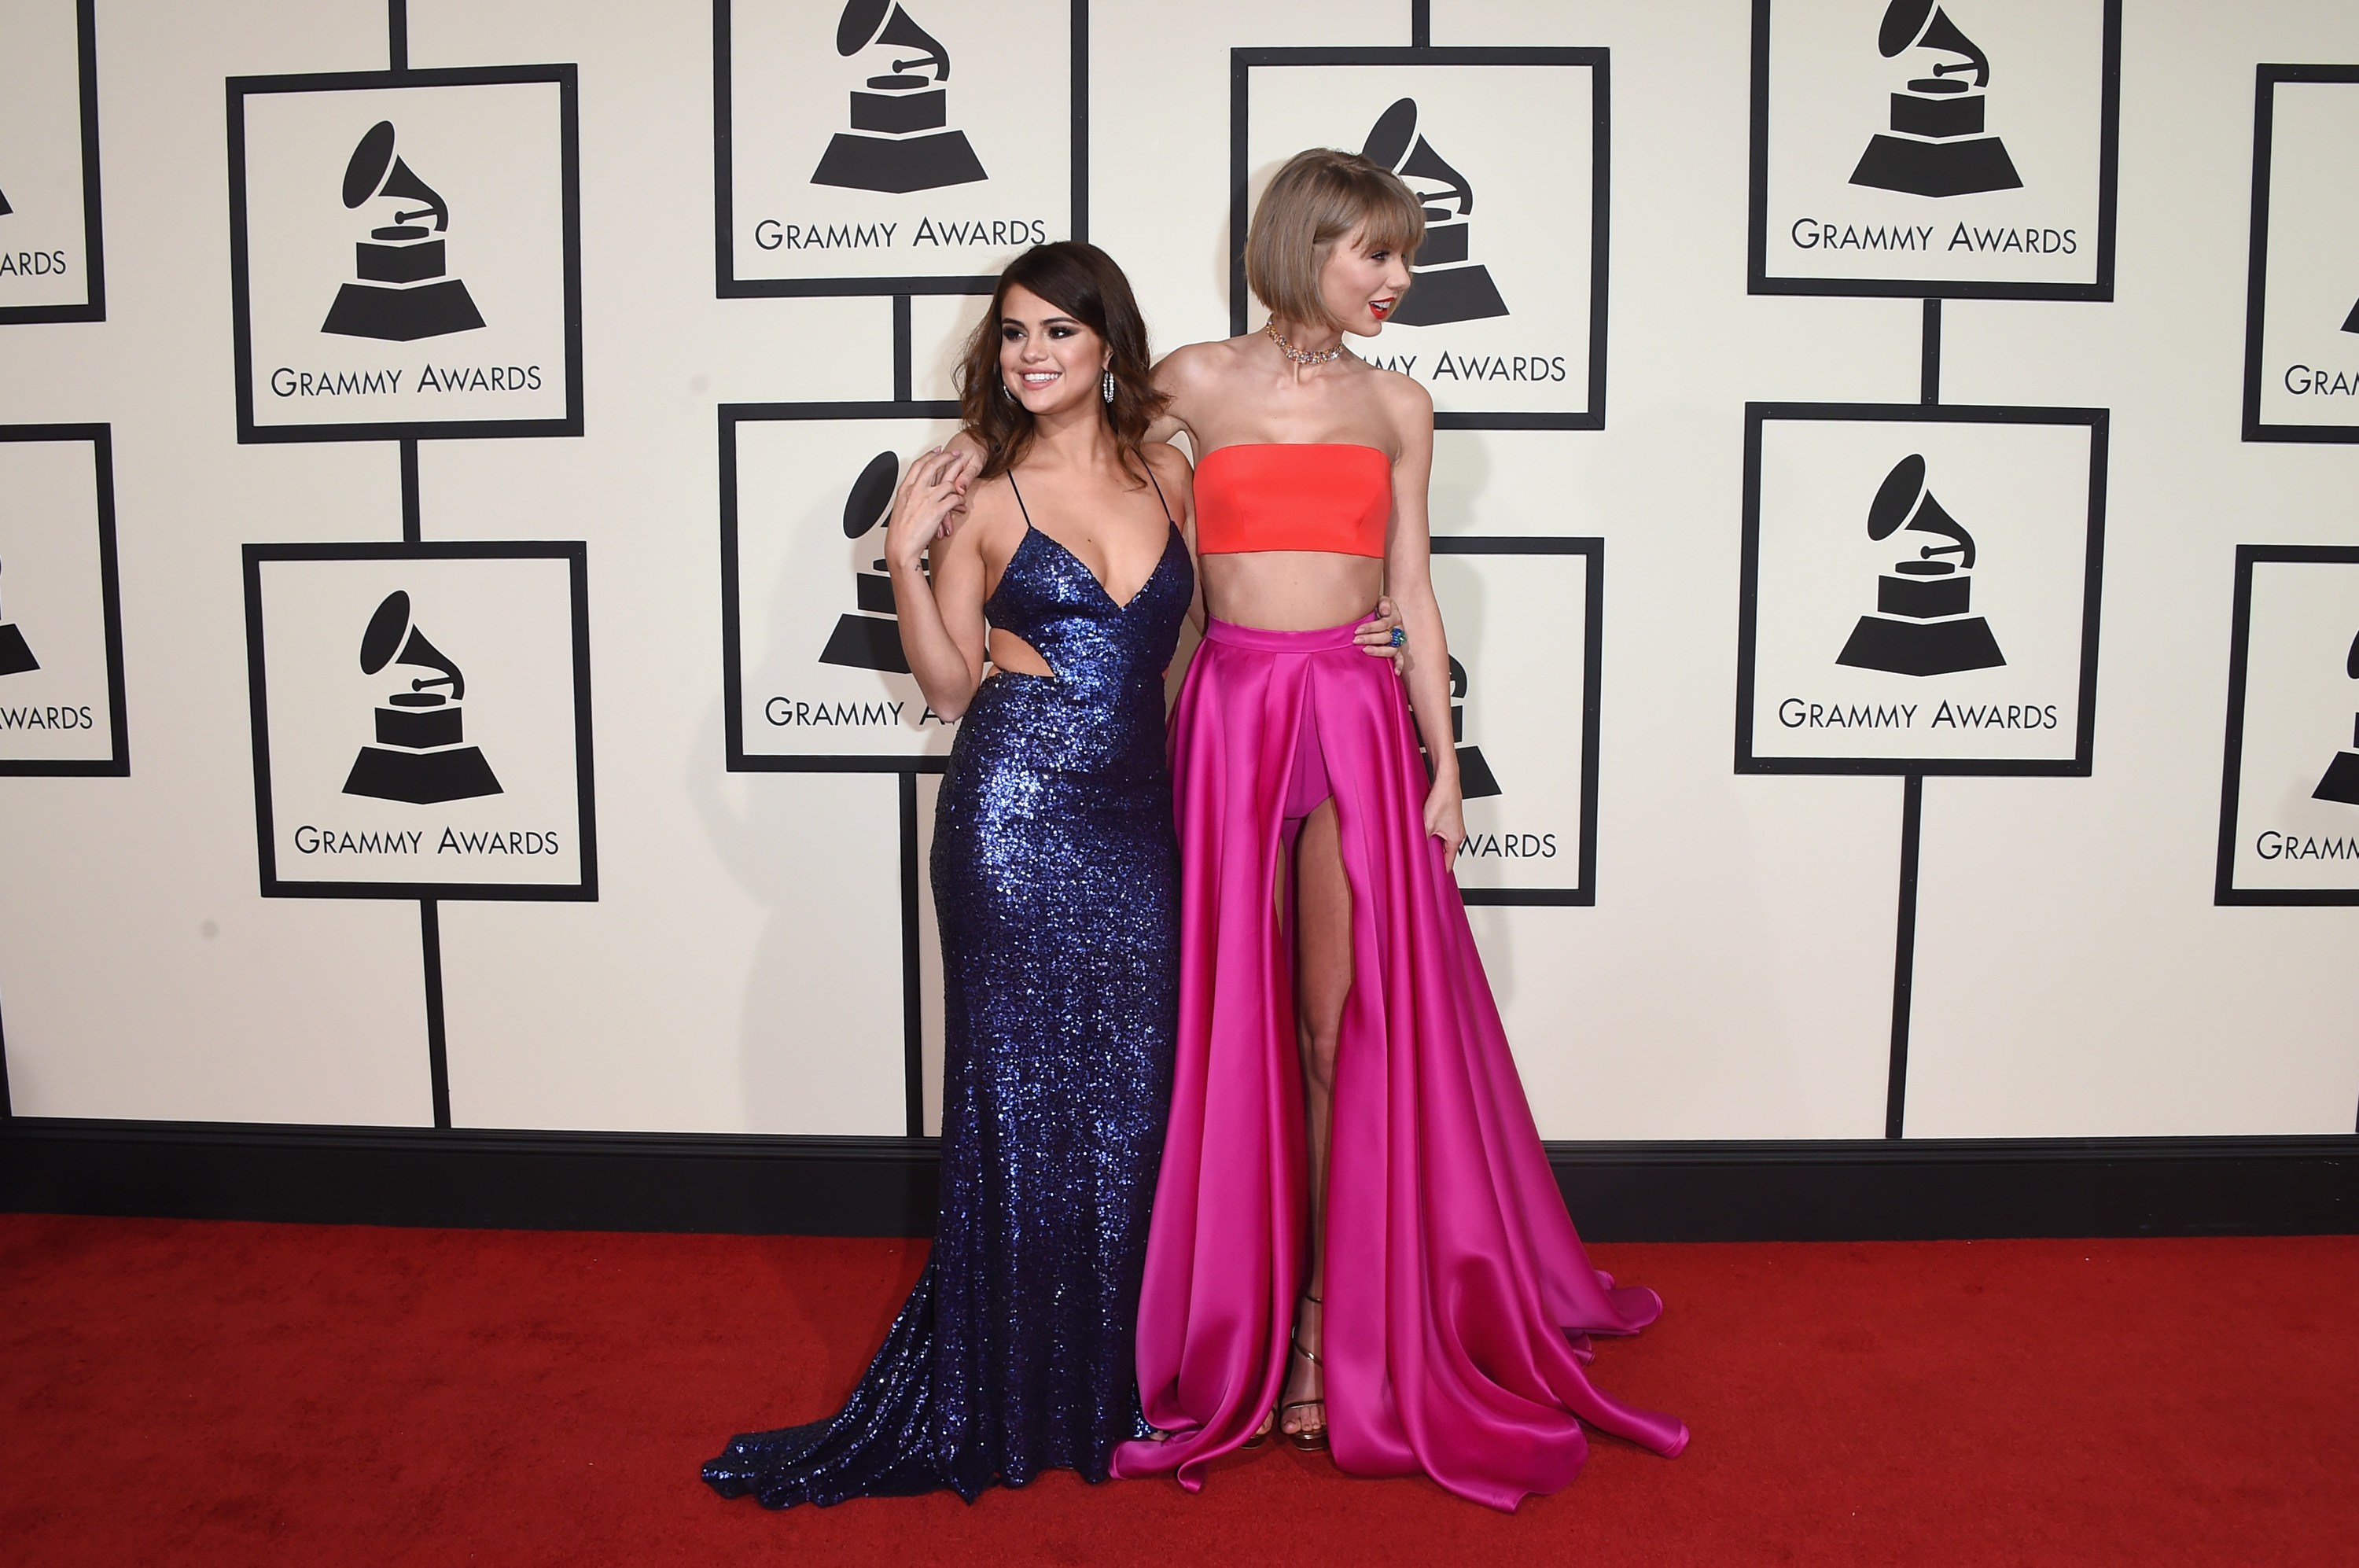 LOS ANGELES, CA - FEBRUARY 15: Musicians Selena Gomez (L) and Taylor Swift attend The 58th GRAMMY Awards at Staples Center on February 15, 2016 in Los Angeles, California. (Photo by Jason Merritt/Getty Images for NARAS)